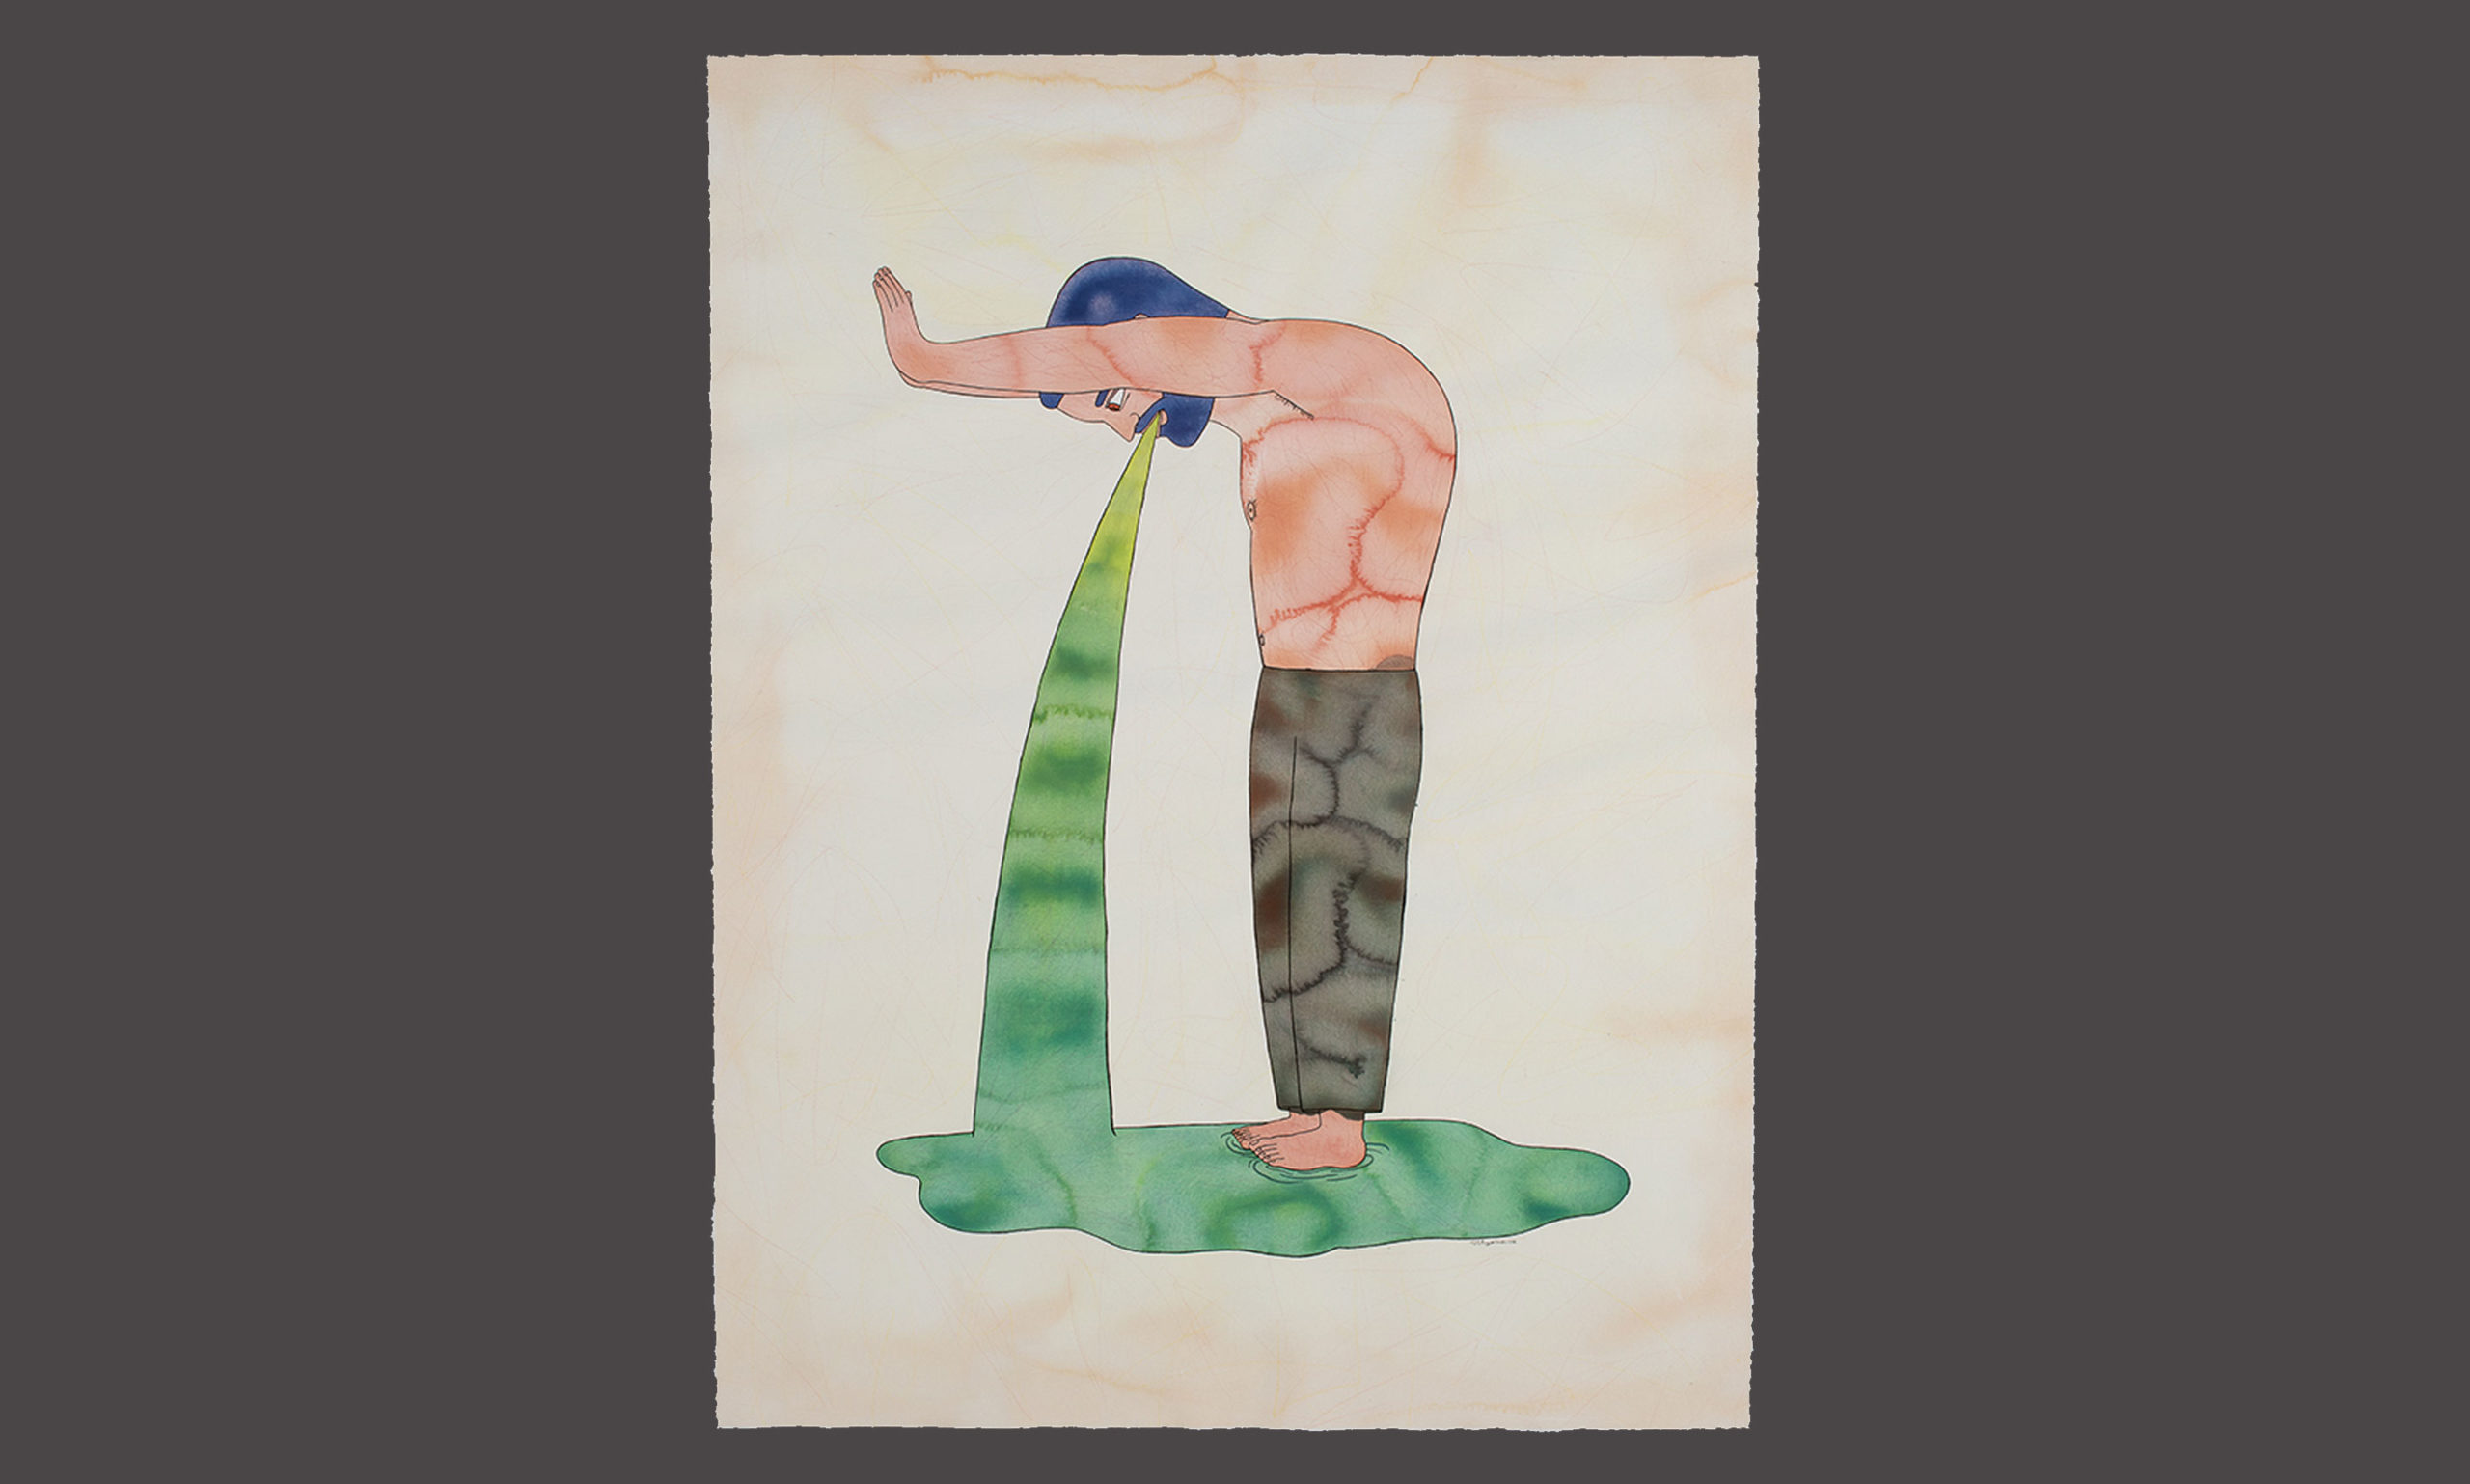 Tonel, El vomito es cultura, 1998. Watercolor, brush & black ink, and colored pencil. Collection of ASU Art Museum. Gift of the Bacardi Art Foundation, Miami and the ASU Art Museum Advisory Board 100% Cuban Campaign. Photography by Craig Smith.